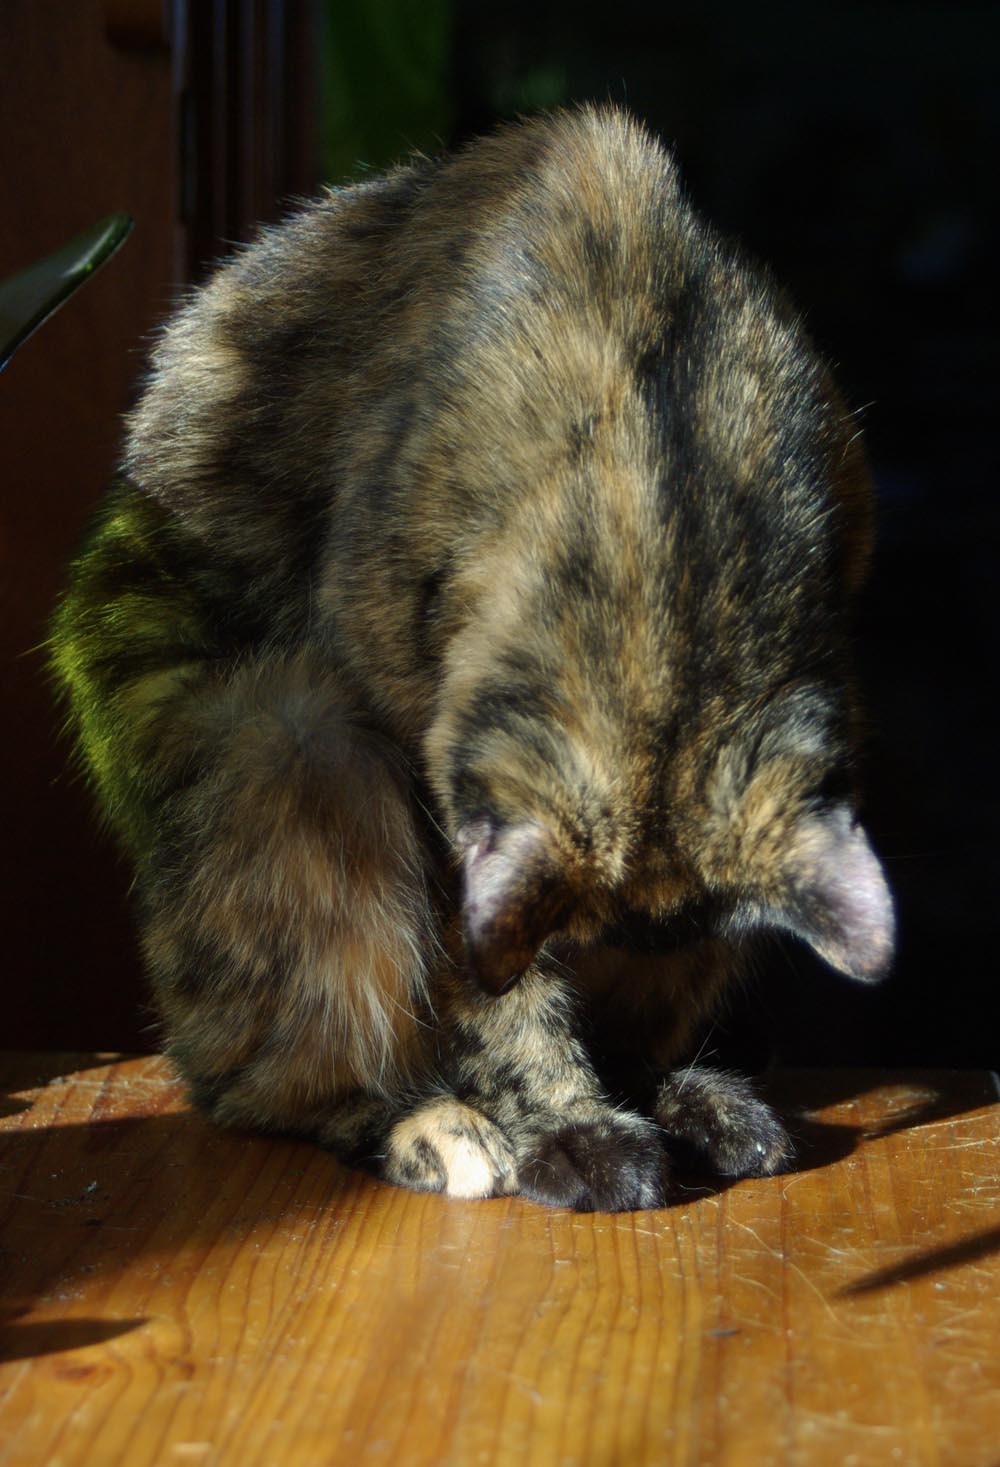 Kelly demonstrates a tortie forward bend.